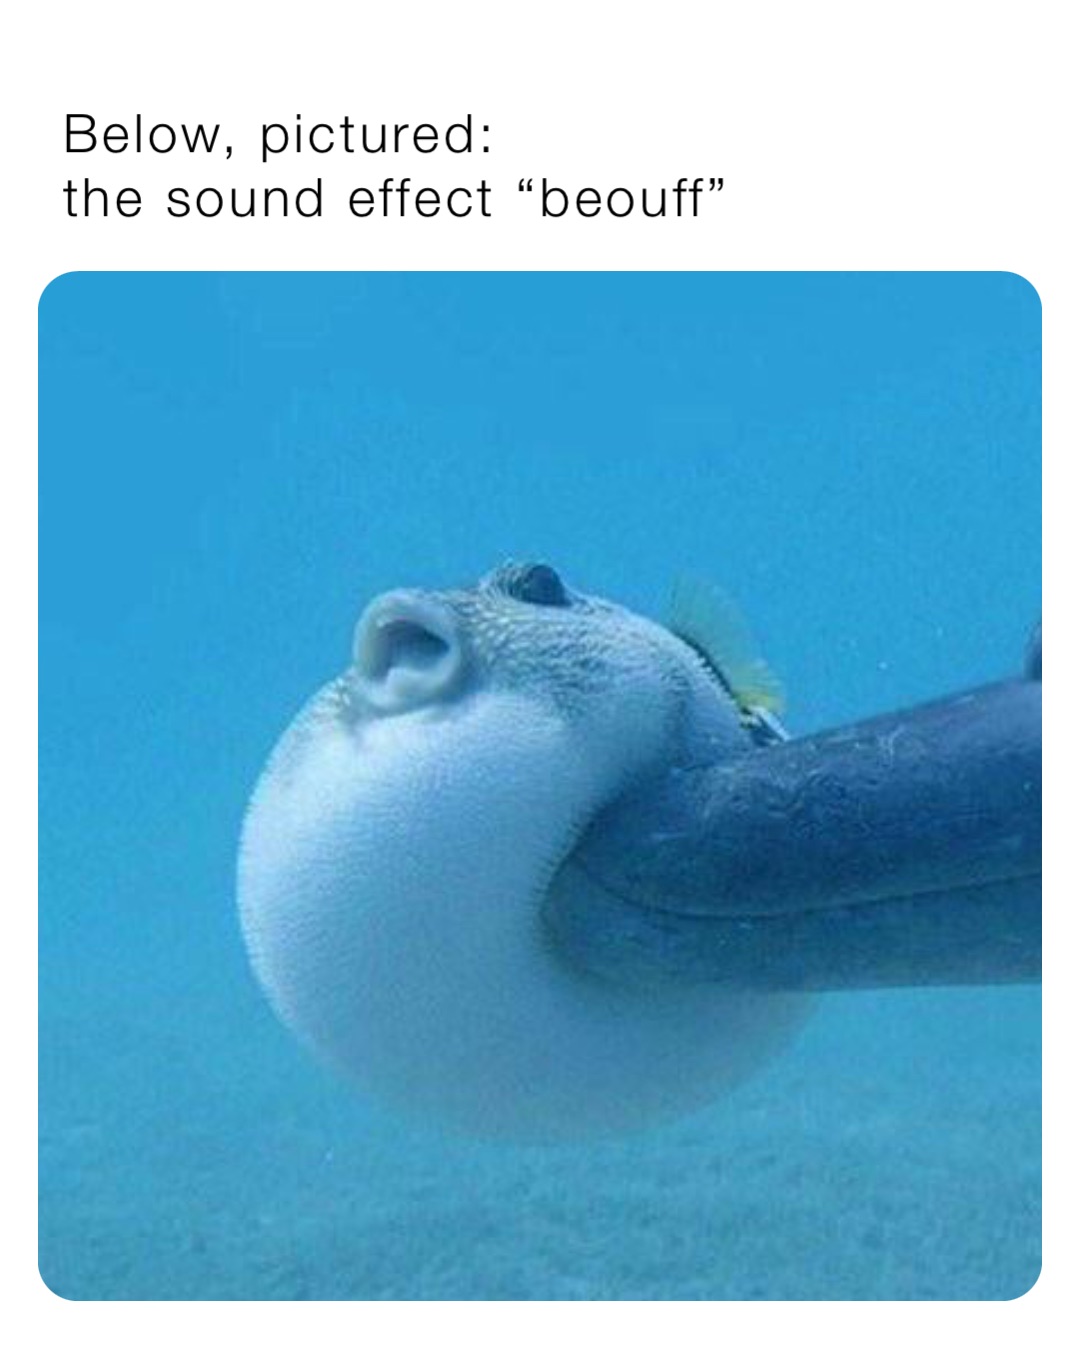 Below, pictured: 
the sound effect “beouff”